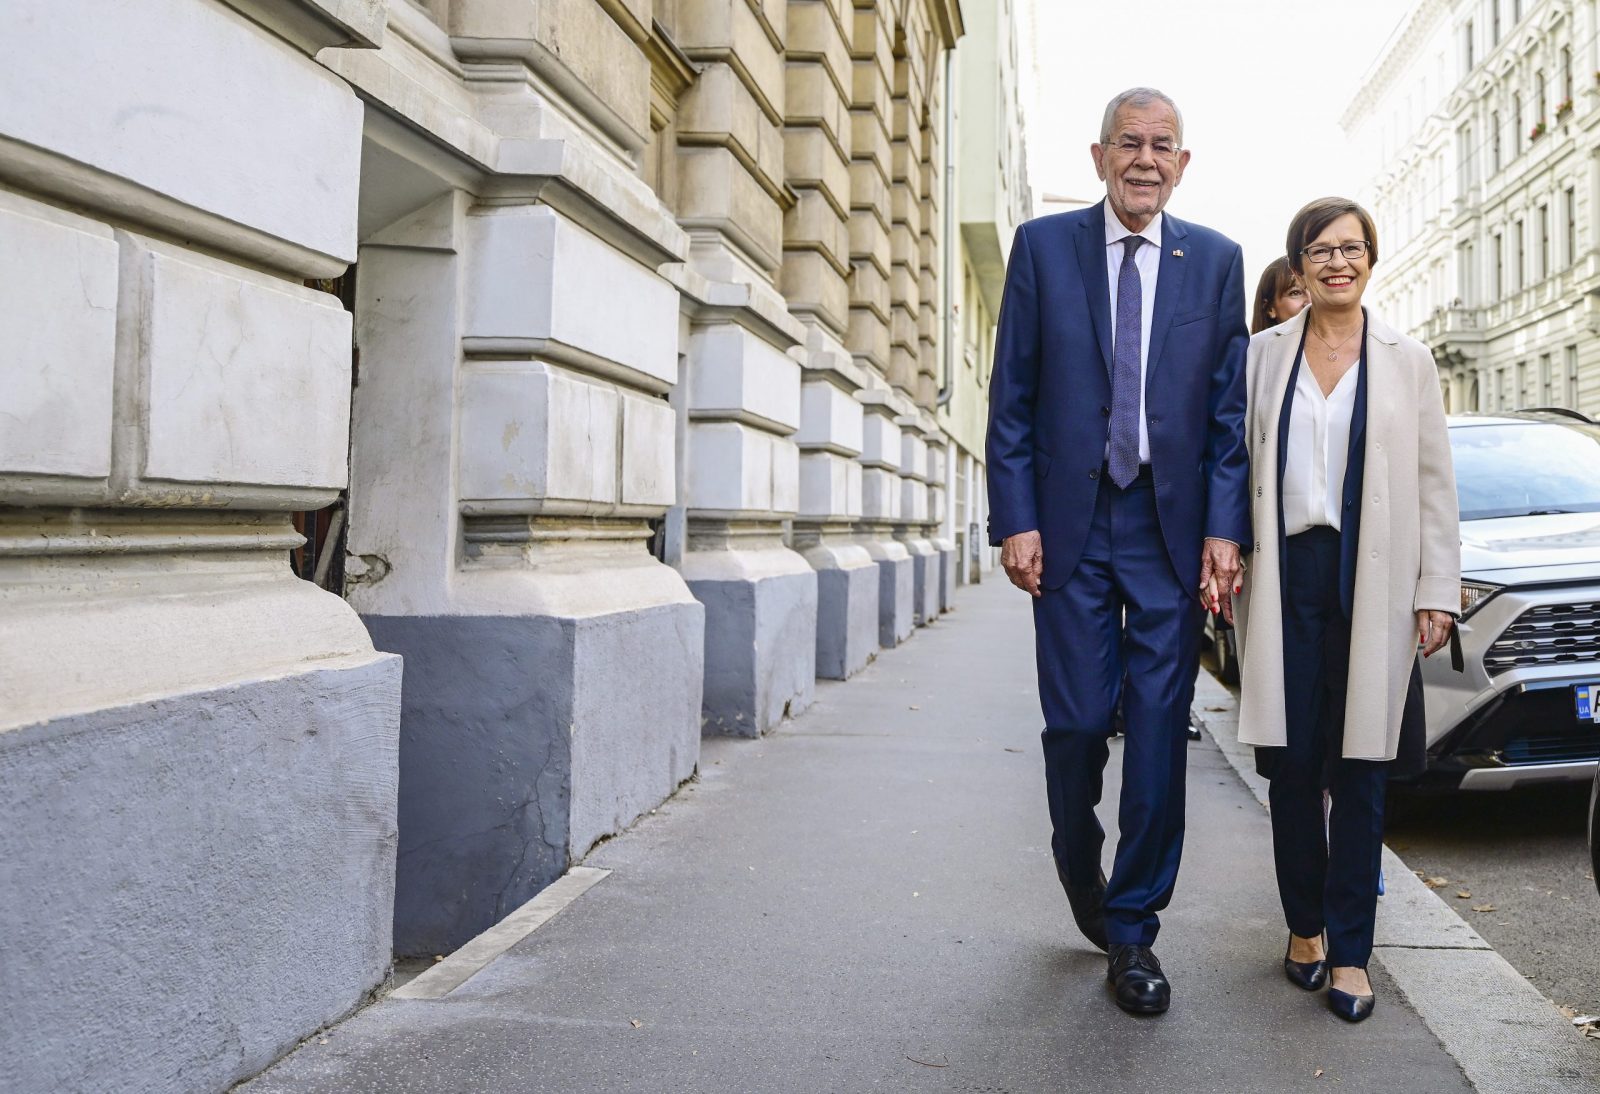 epa10232367 Austrian President Alexander Van der Bellen (L) and his wife Doris Schmidauer arrive at a polling station to cast their votes during the Austrian presidential elections in Vienna, Austria, 09 October 2022. Over six million Austrians are casting their votes to elect the next Austrian president. If no candidate achieves the outright majority, more than 50 percent of valid votes, the run-off will take place on 06 November 2022.  EPA/CHRISTIAN BRUNA